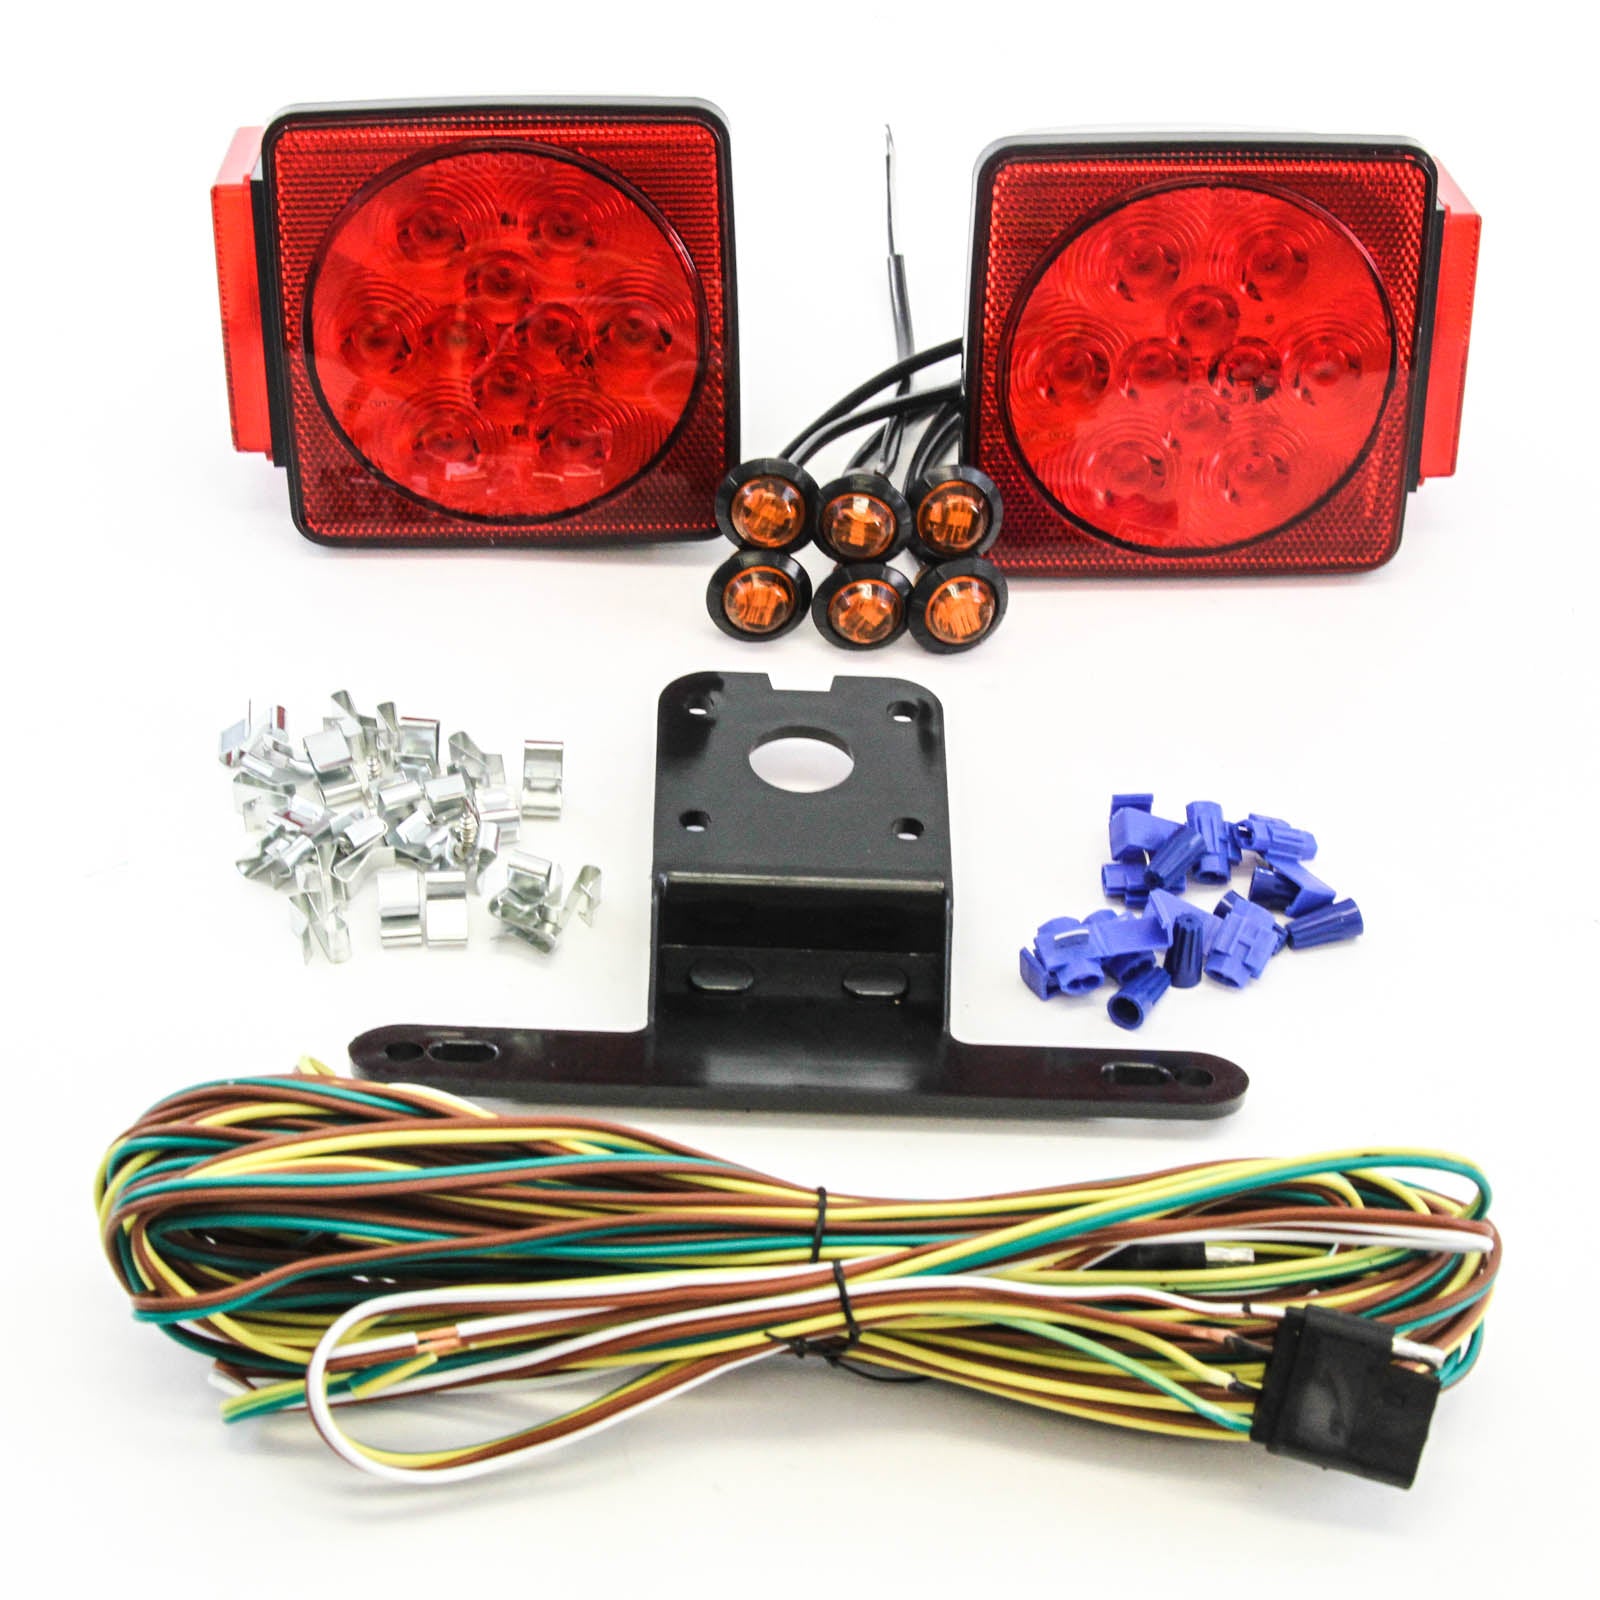 Red Hound Auto LED Submersible Square Light Kit Trailer 80 Inches- Boat Marine & 6 Amber Side Marker